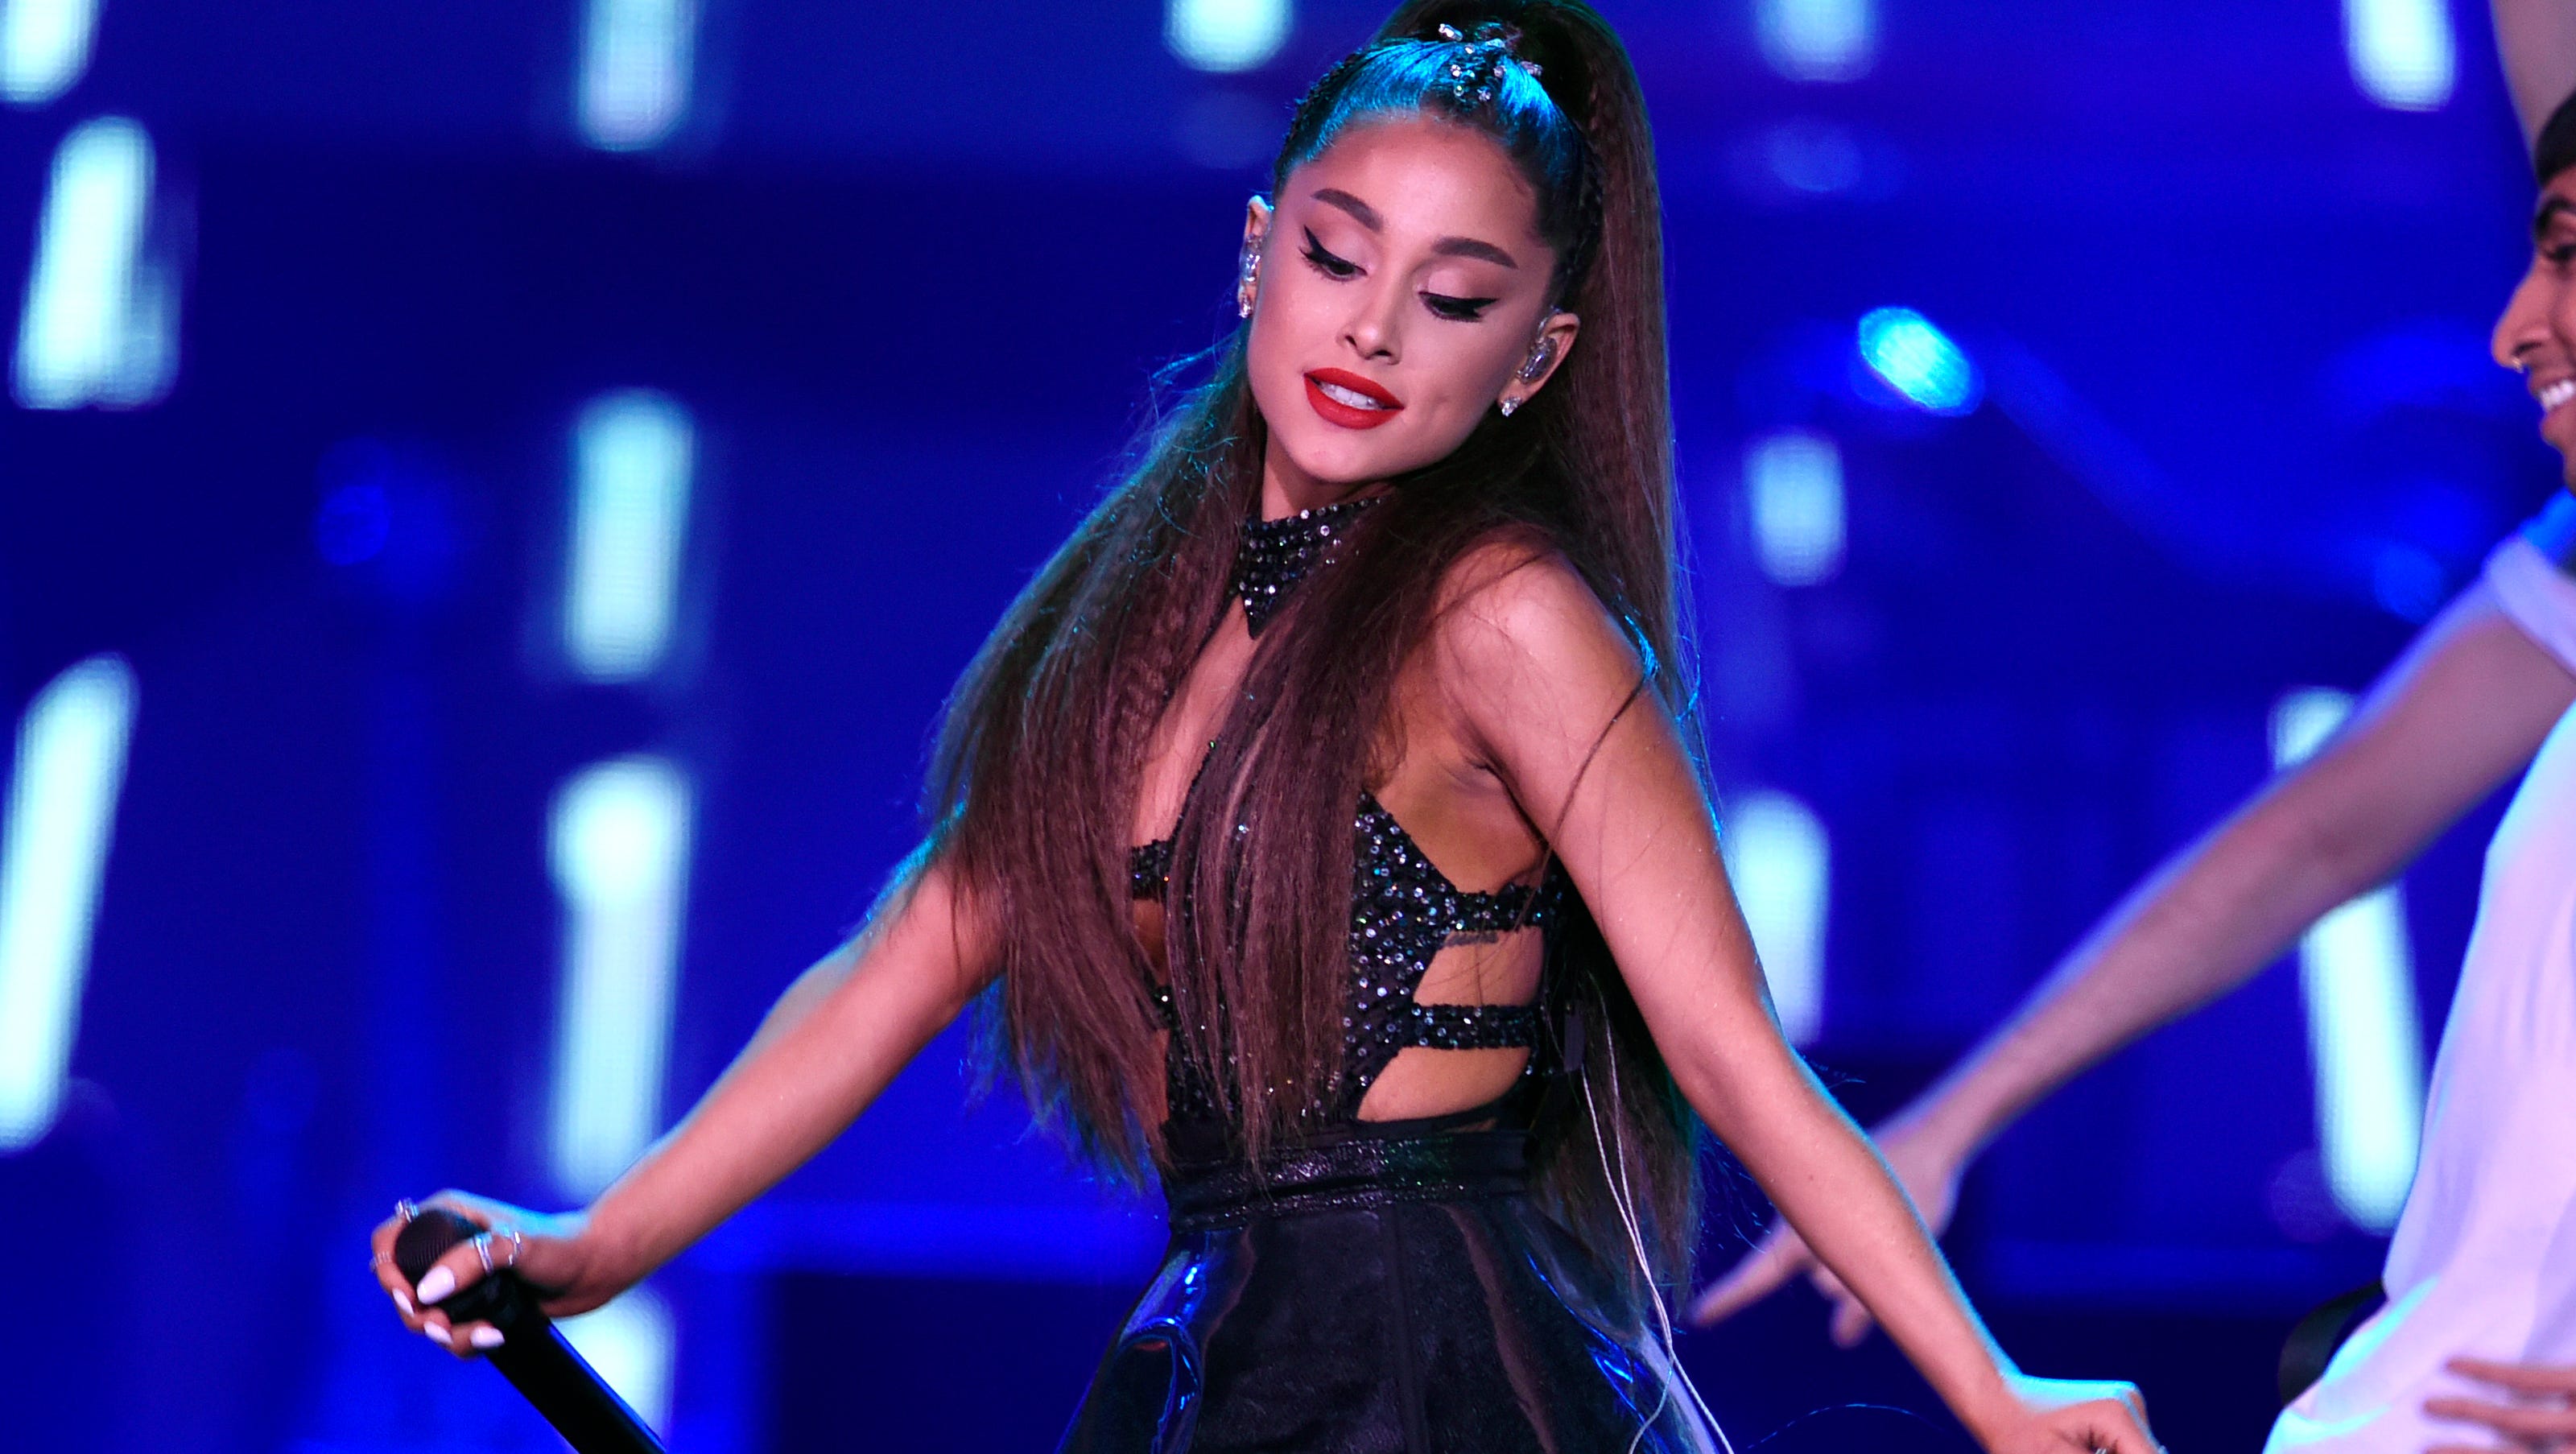 Ariana Grande Bisexual That Question Is Problematic To Lgbtq People